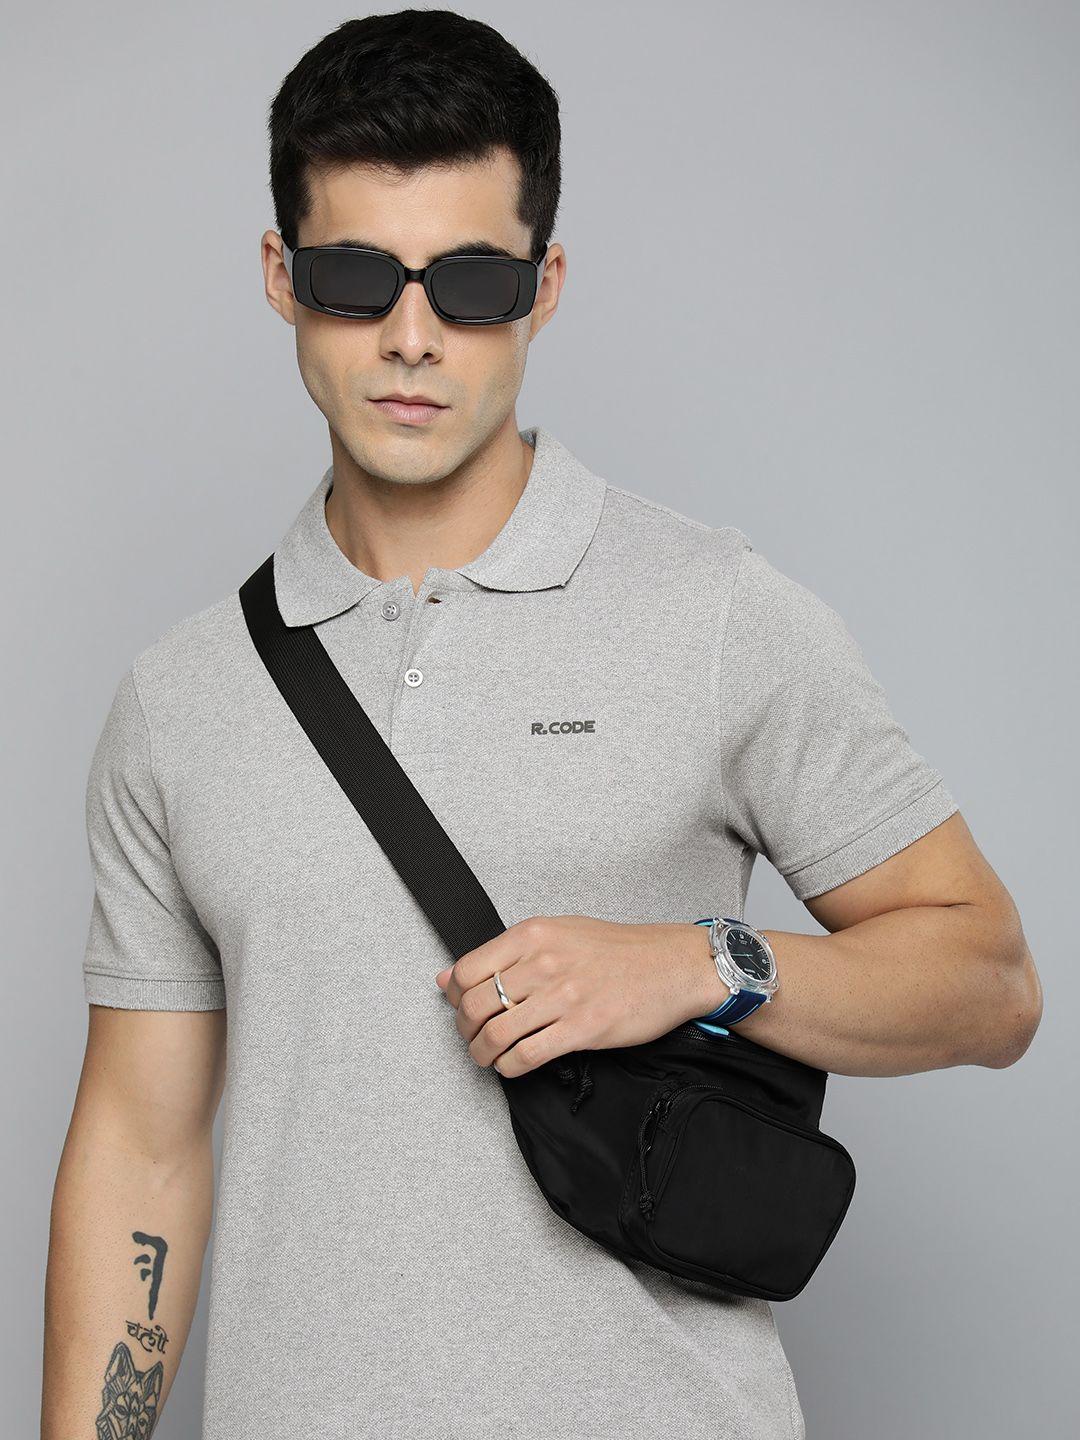 r.code by the roadster life co. men solid polo collar t-shirt